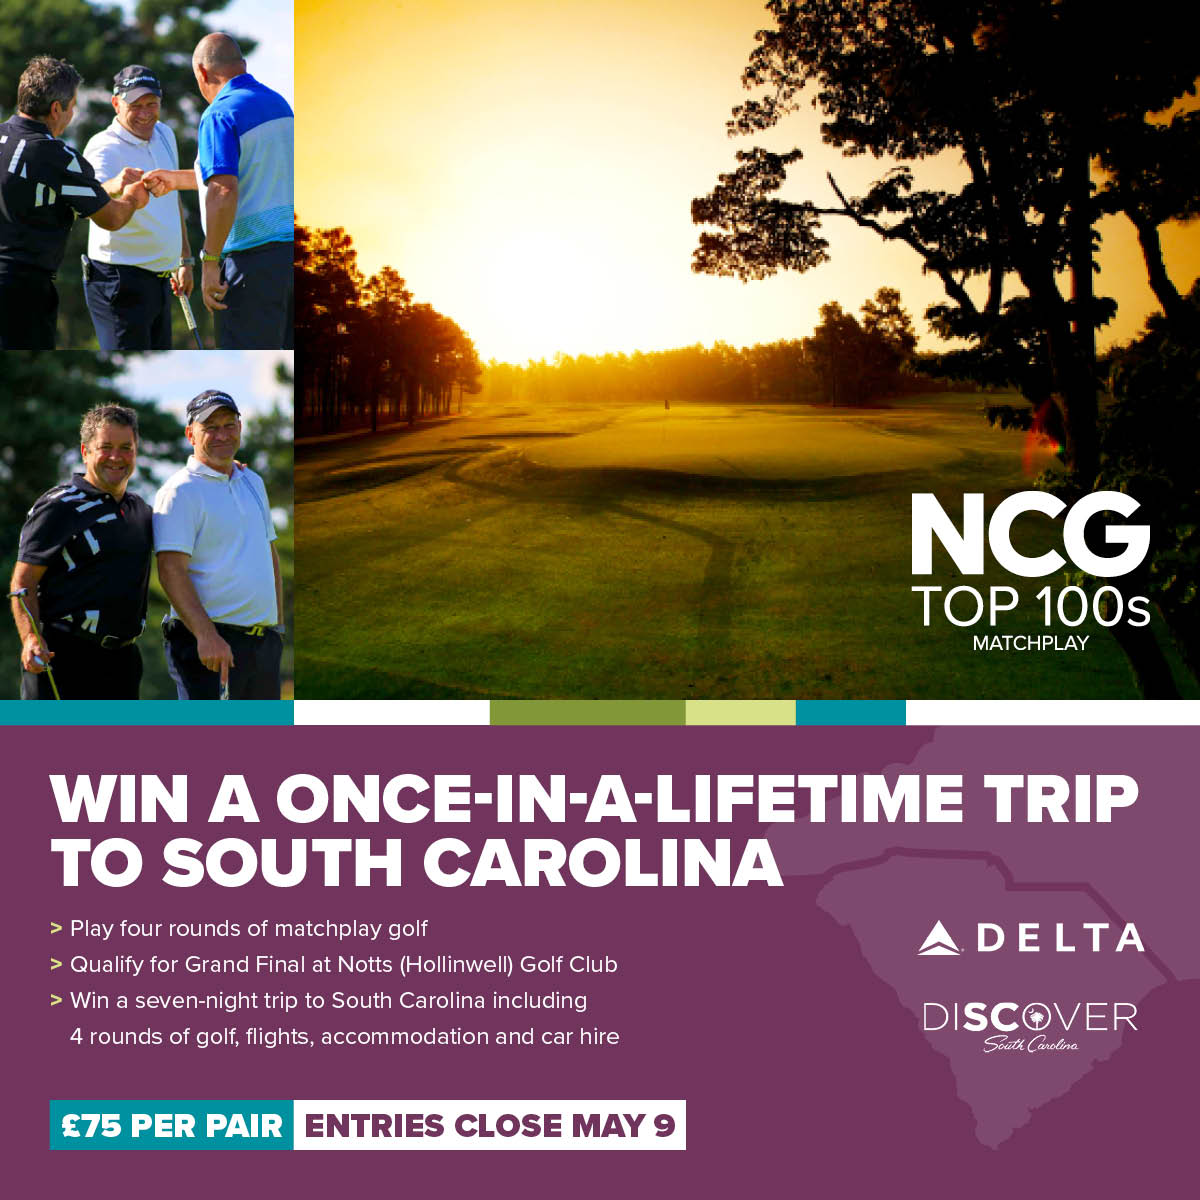 TWO WEEKS left to enter our Summer Matchplay ⏳ Don't miss out on the chance to play your way to a seven-night golf trip in South Carolina with this year's Summer Matchplay. ncgtop100stour.com/event/ncg-top-…